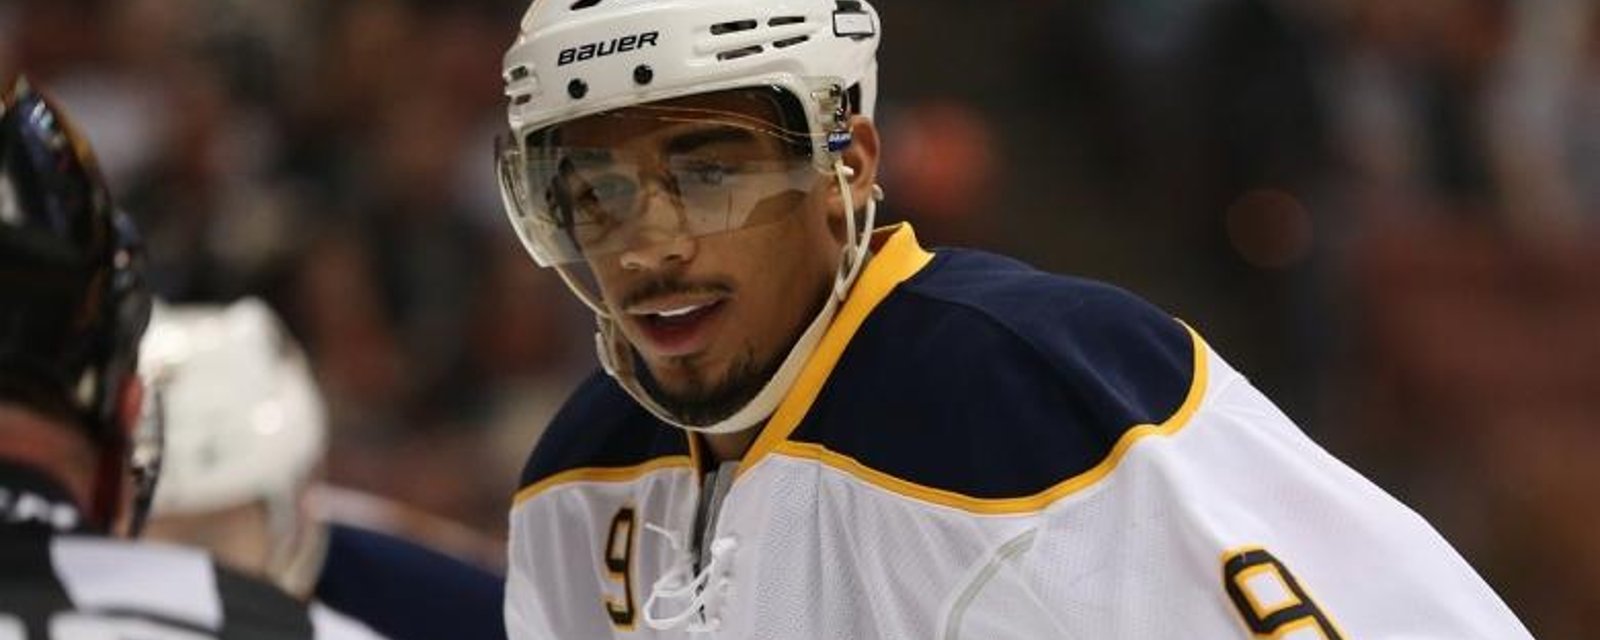 Breaking: Images leak of Evander Kane being arrested on the streets of Buffalo.